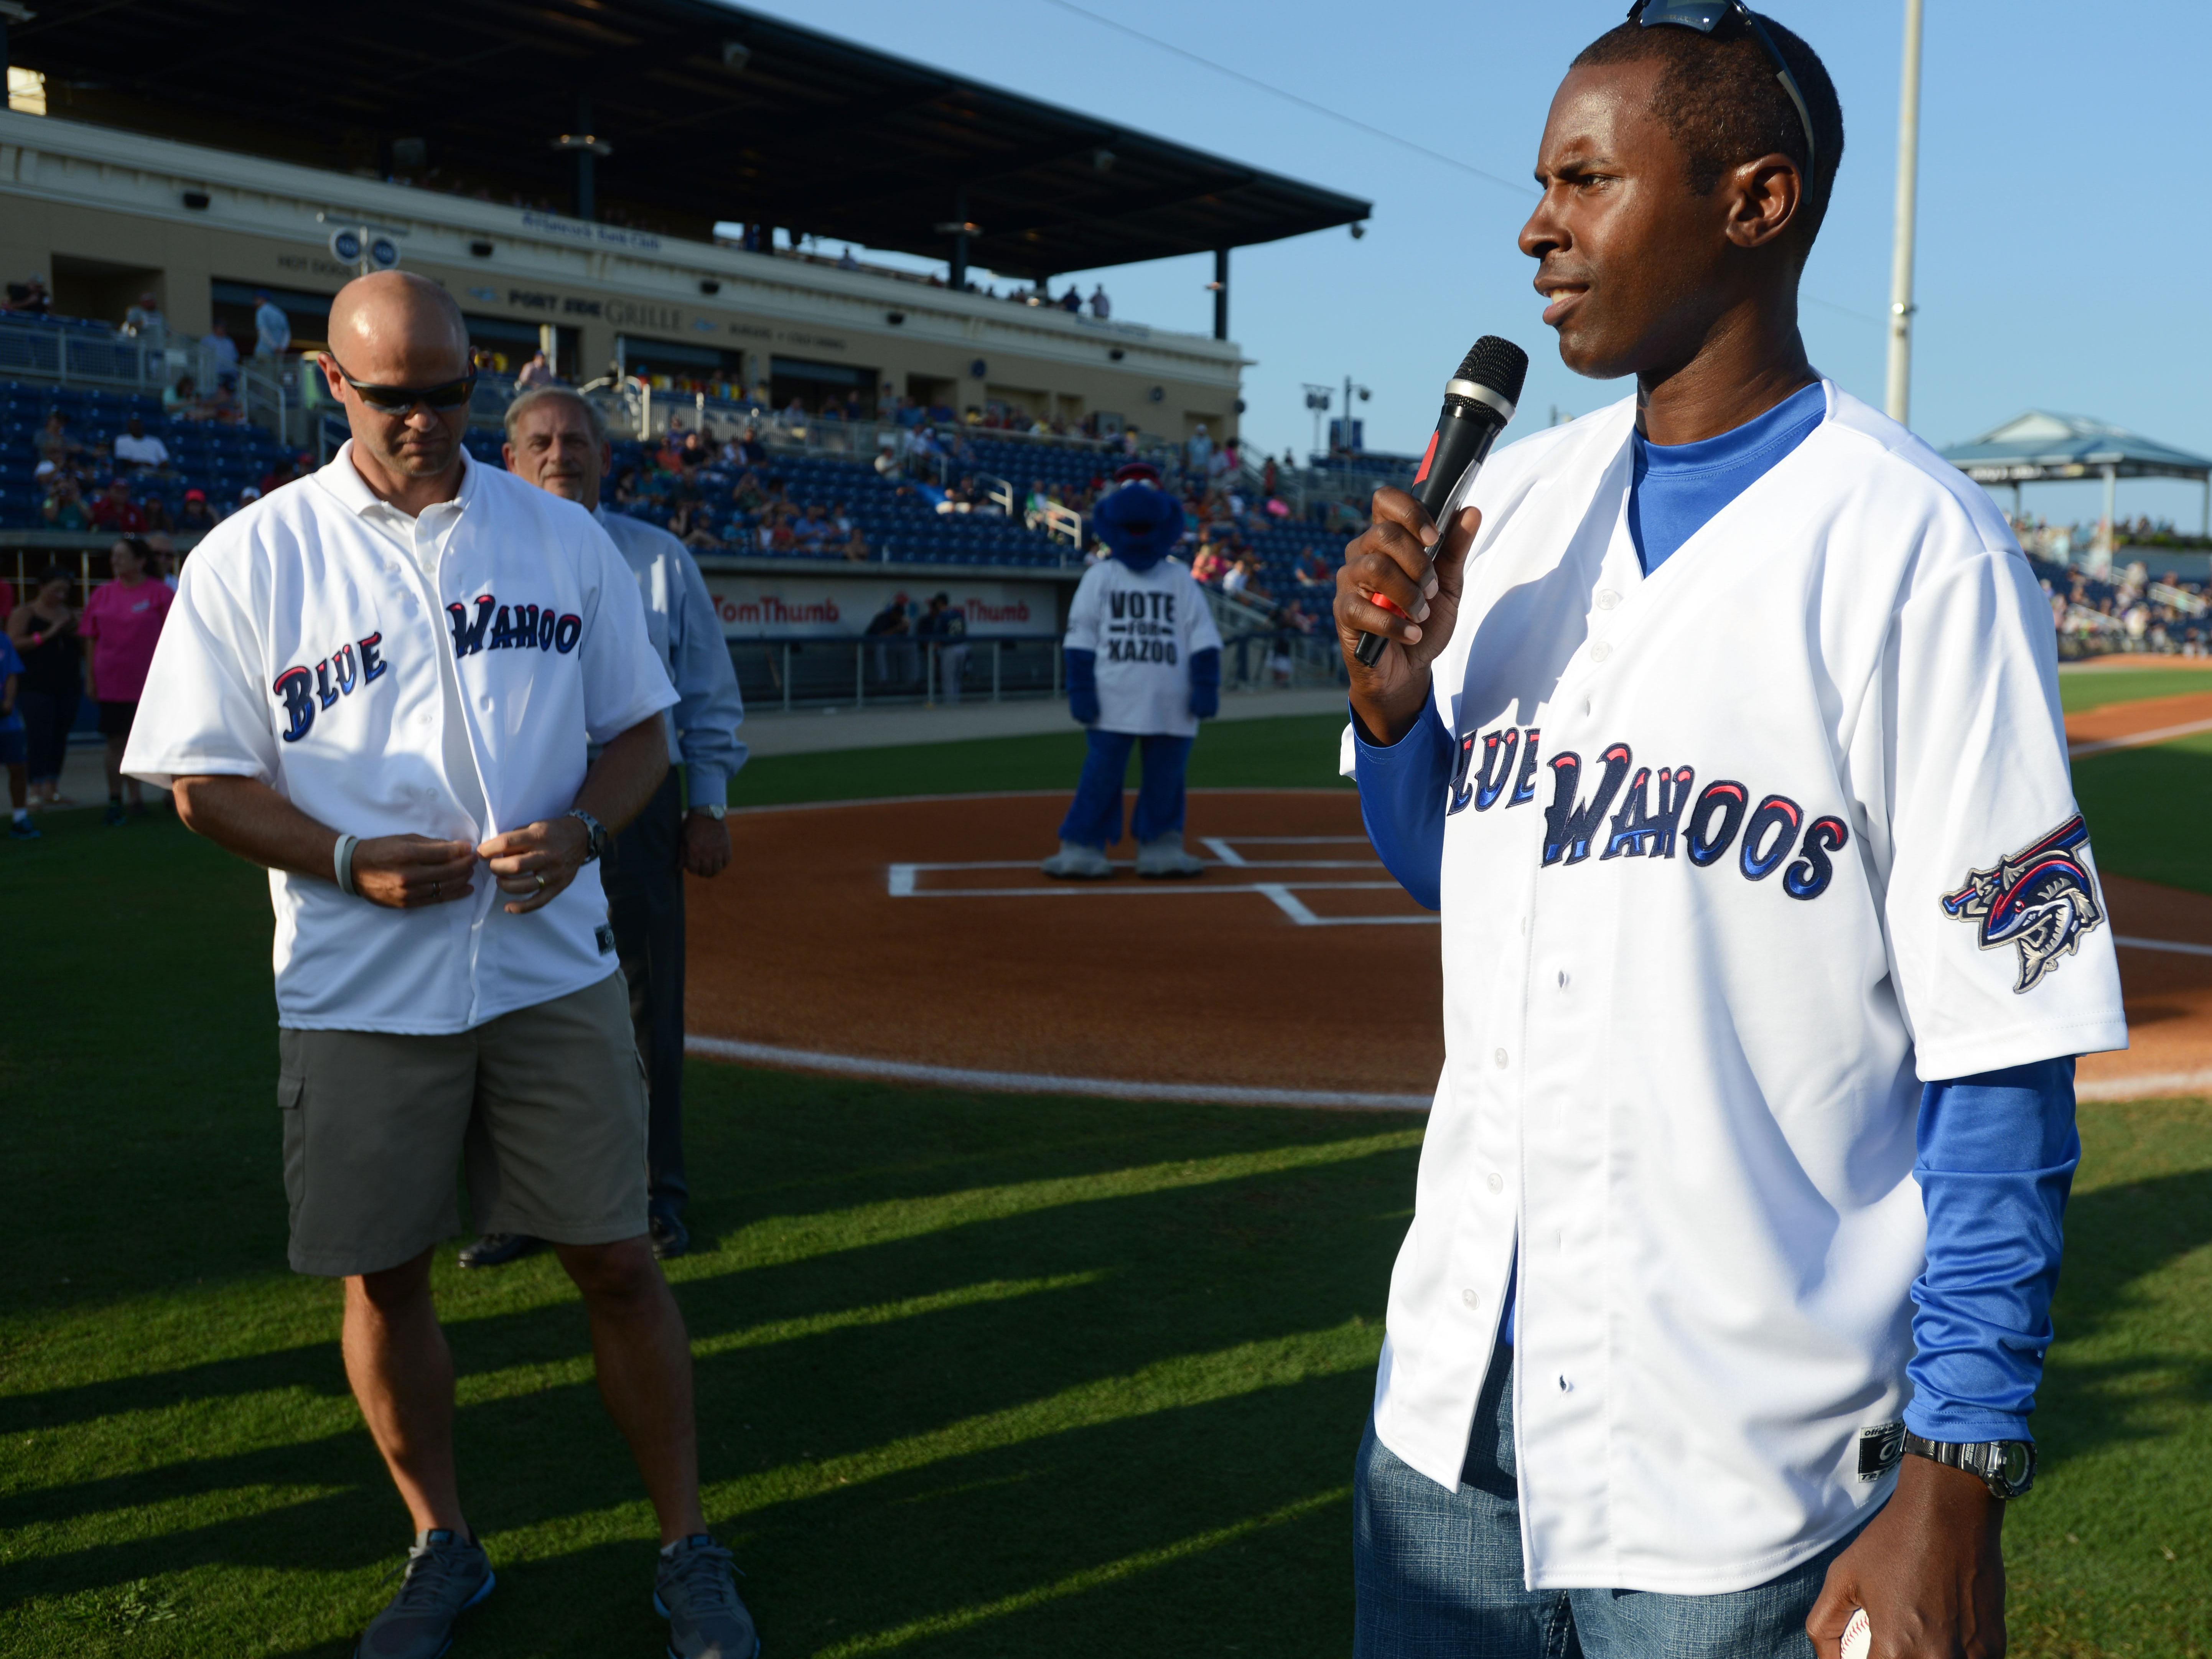 Charlie Ward and Danny Wuerffel, two Heisman Trophy winning quarterbacks, were honored last year before a Blue Wahoos game. Ward will join Blue Wahoos staff.